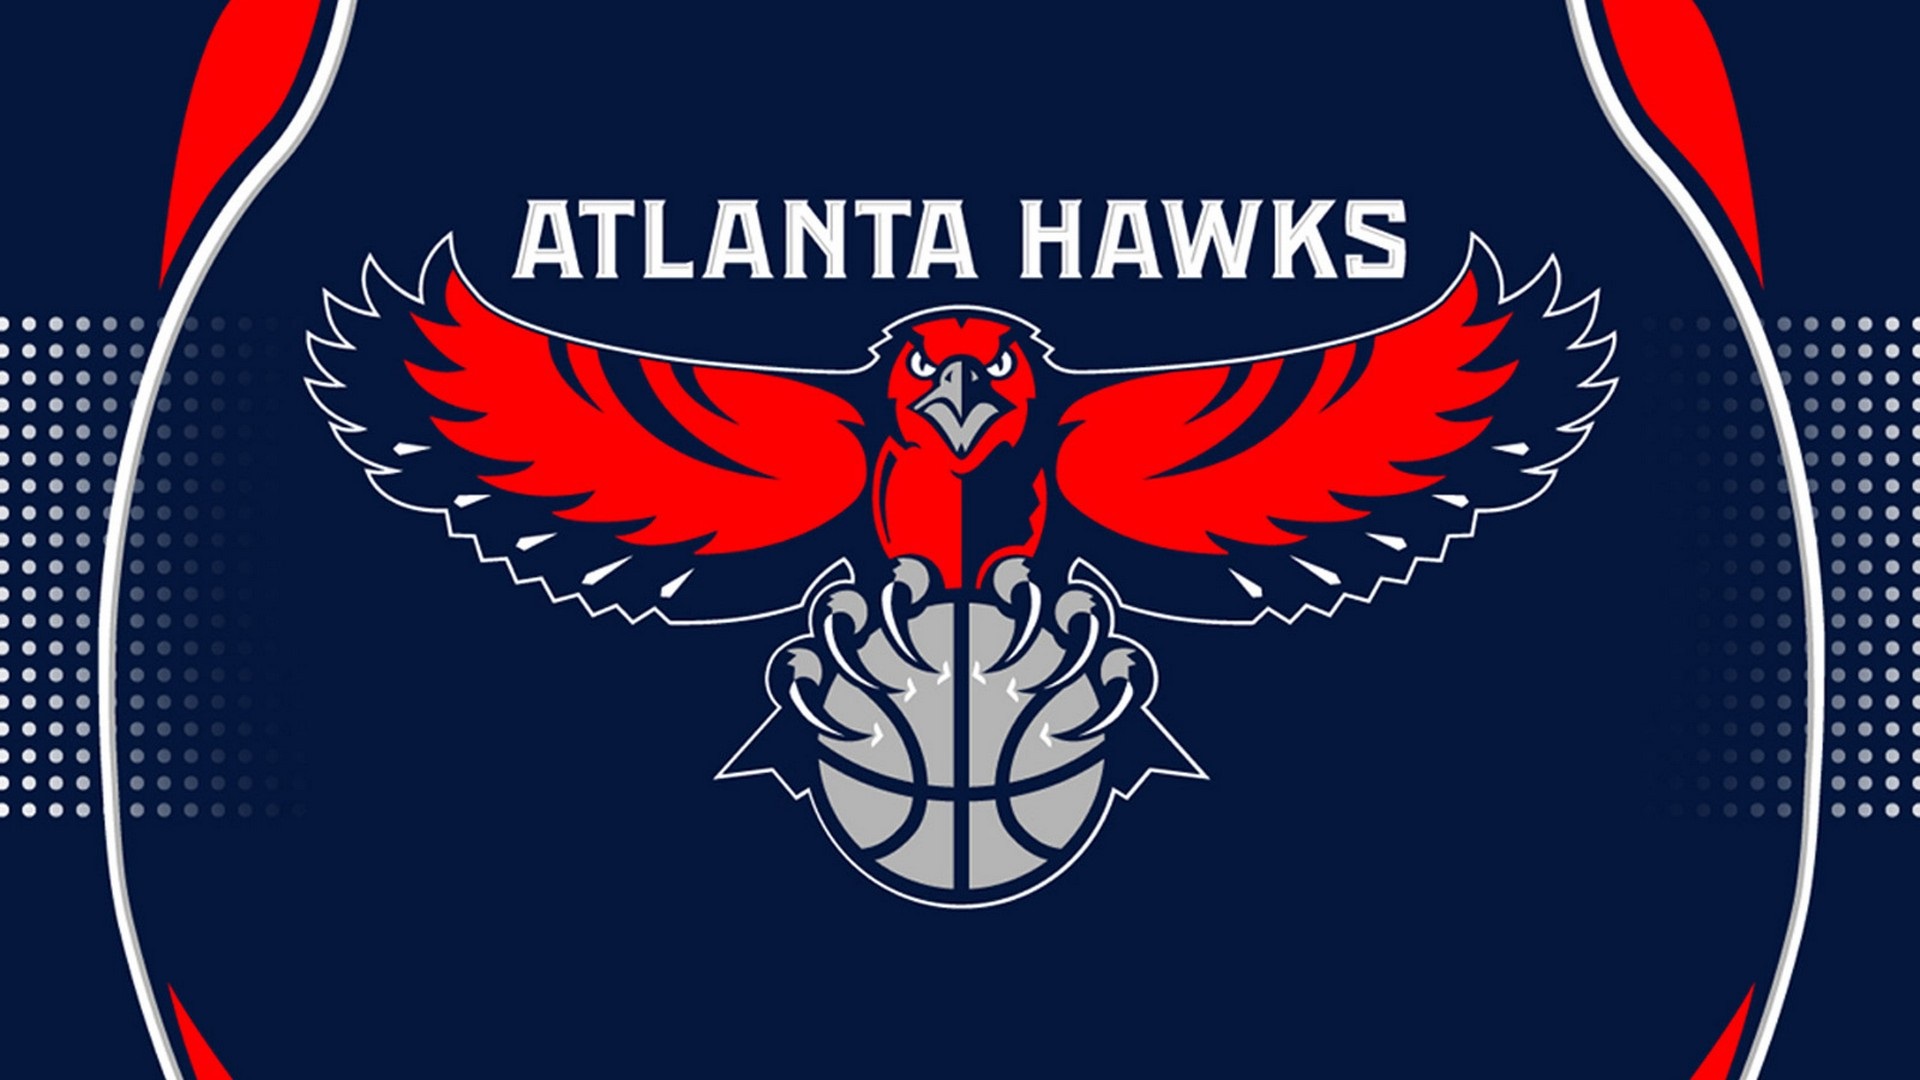 HD Backgrounds Atlanta Hawks with image dimensions 1920x1080 pixel. You can make this wallpaper for your Desktop Computer Backgrounds, Windows or Mac Screensavers, iPhone Lock screen, Tablet or Android and another Mobile Phone device